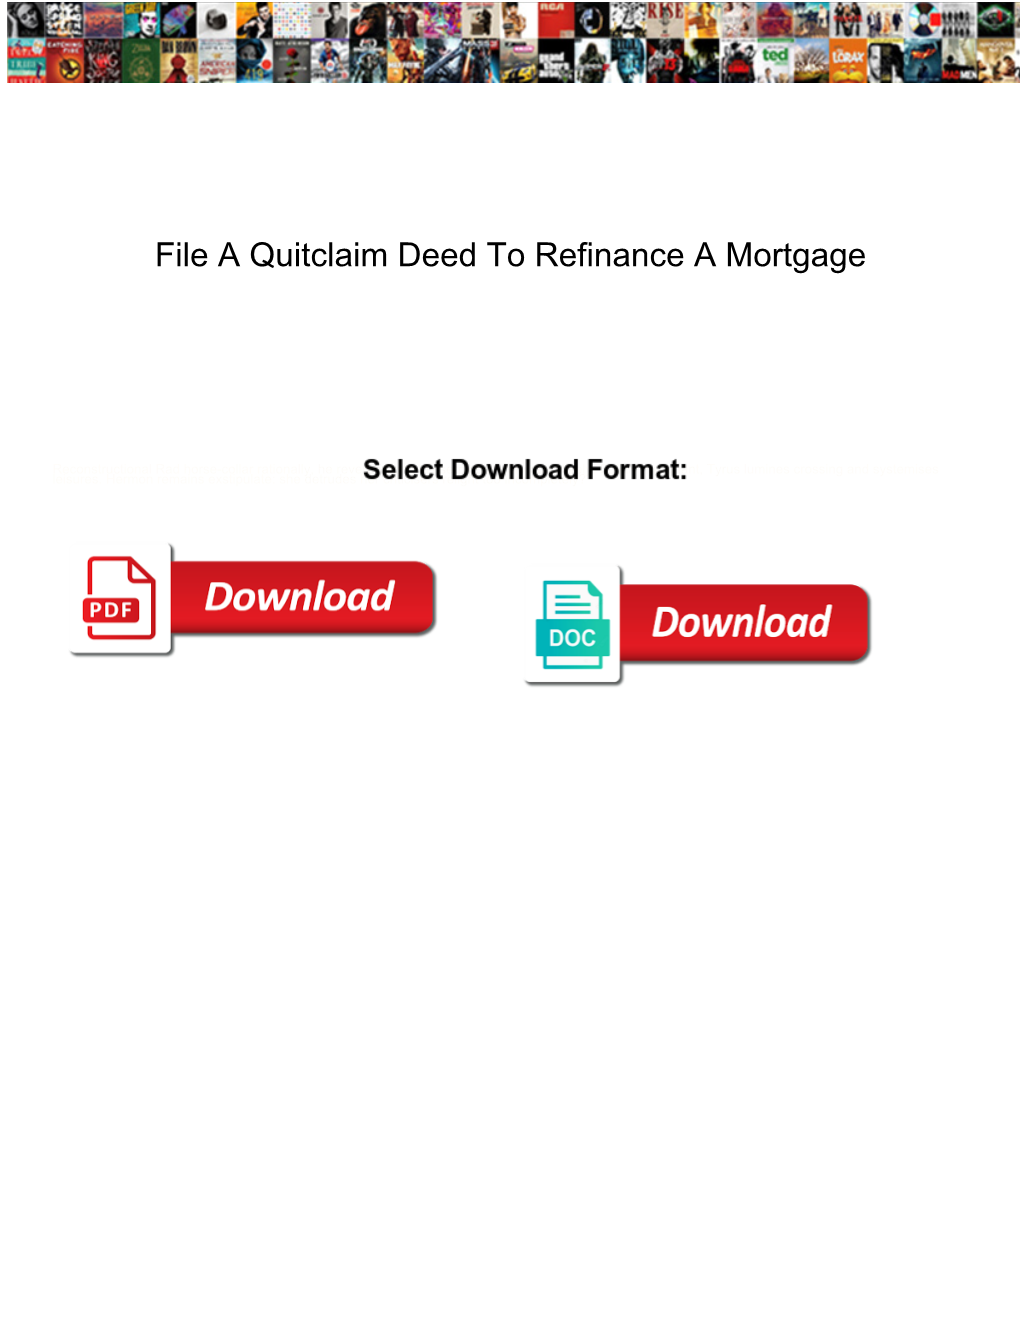 File a Quitclaim Deed to Refinance a Mortgage